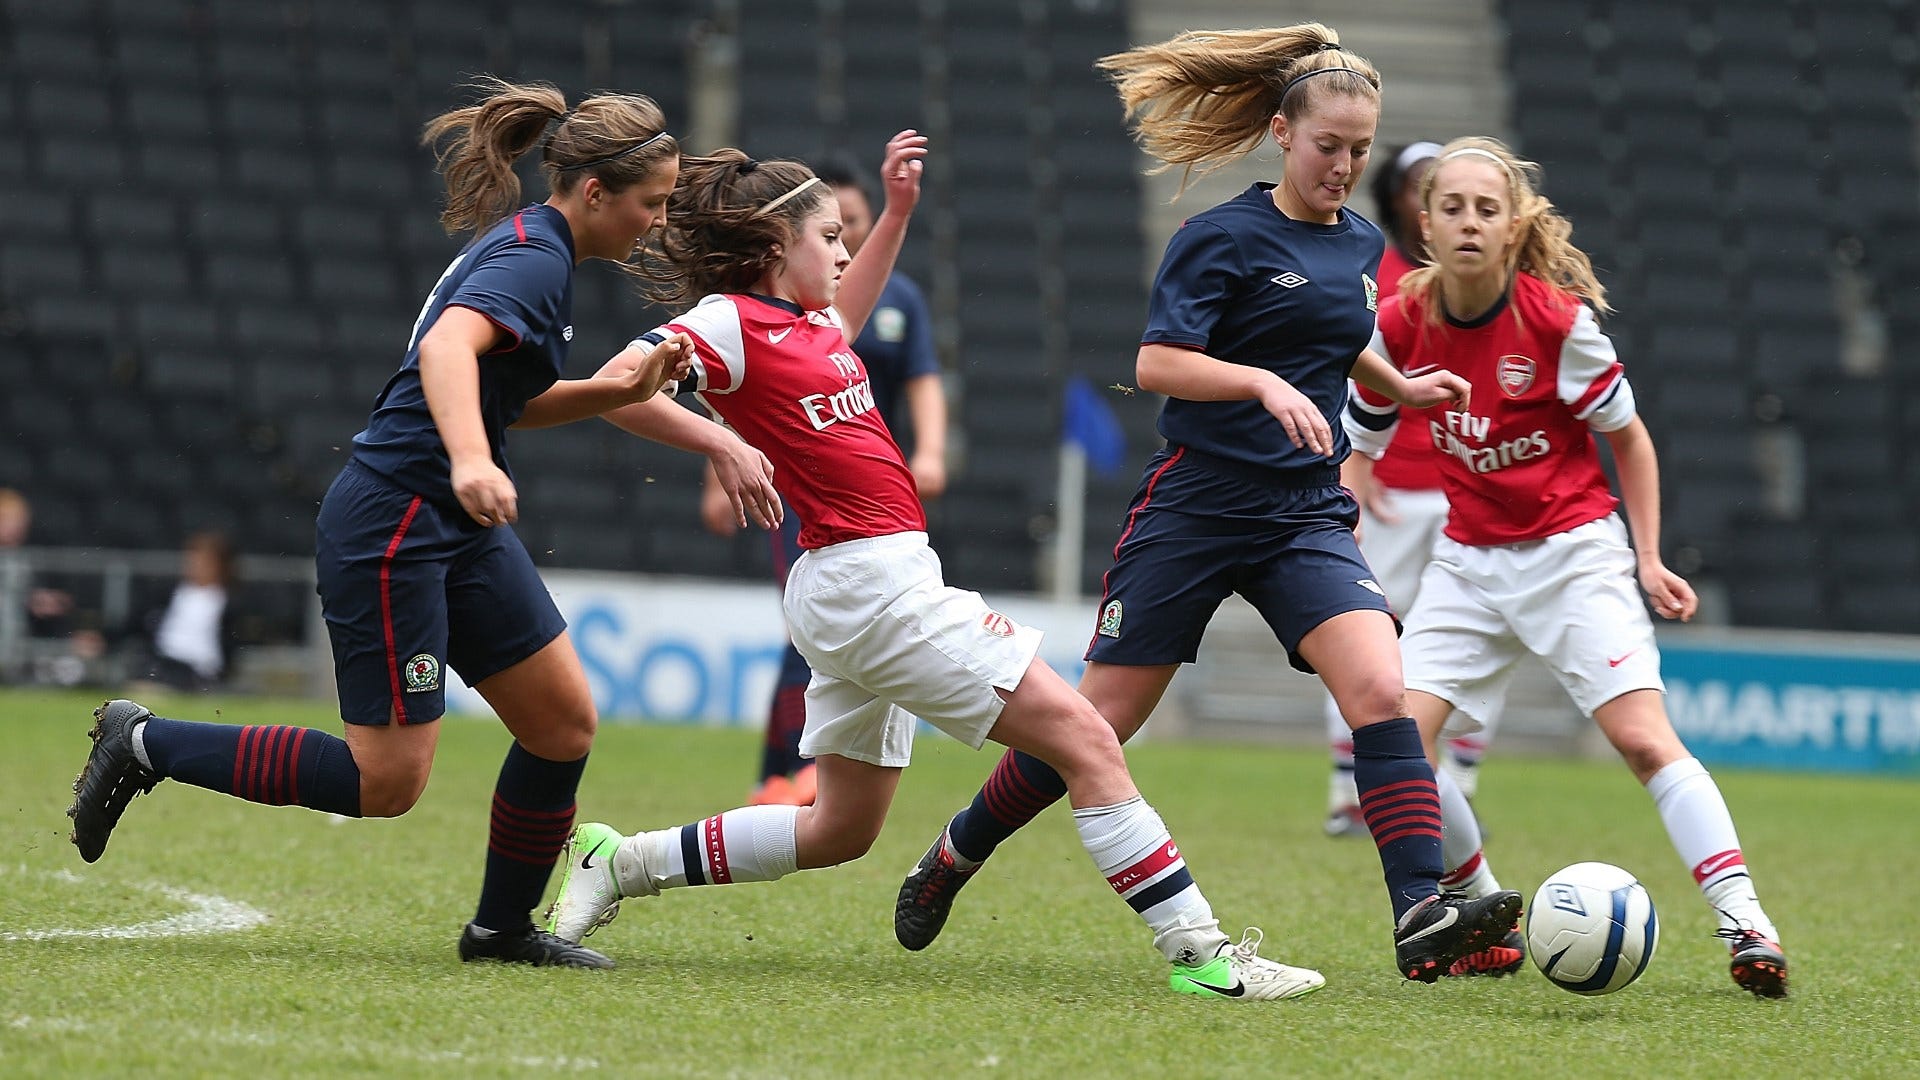 Inside the Blackburn Rovers talent factory that helped Keira Walsh, Georgia  Stanway and Ella Toone become Lionesses